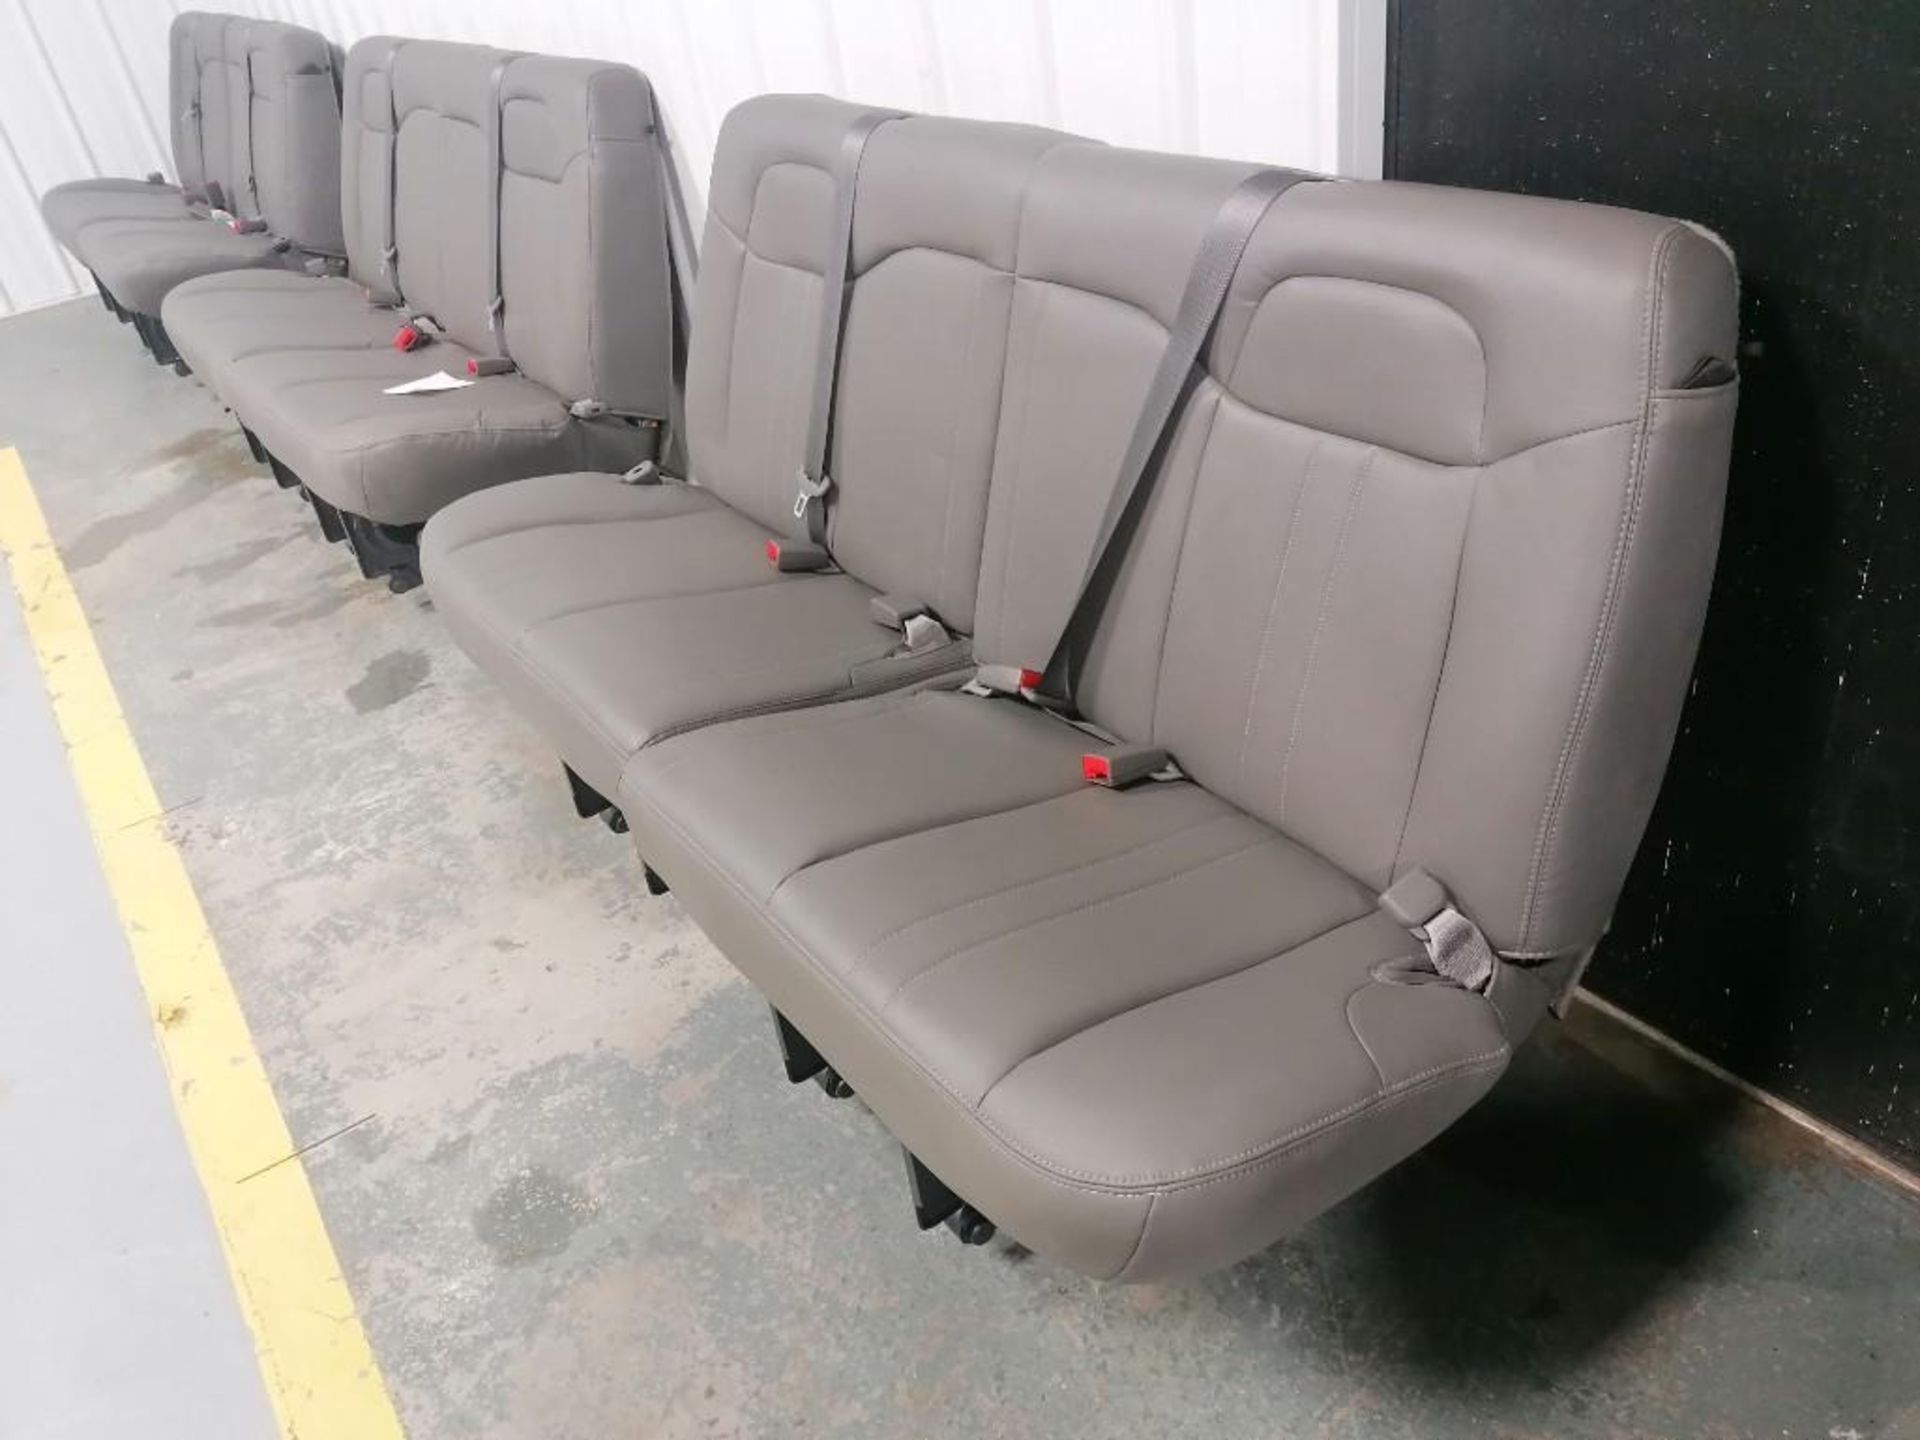 2021 NEW Chevrolet Express Passenger Seat Row. Located in Mt. Pleasant, IA. - Image 2 of 3